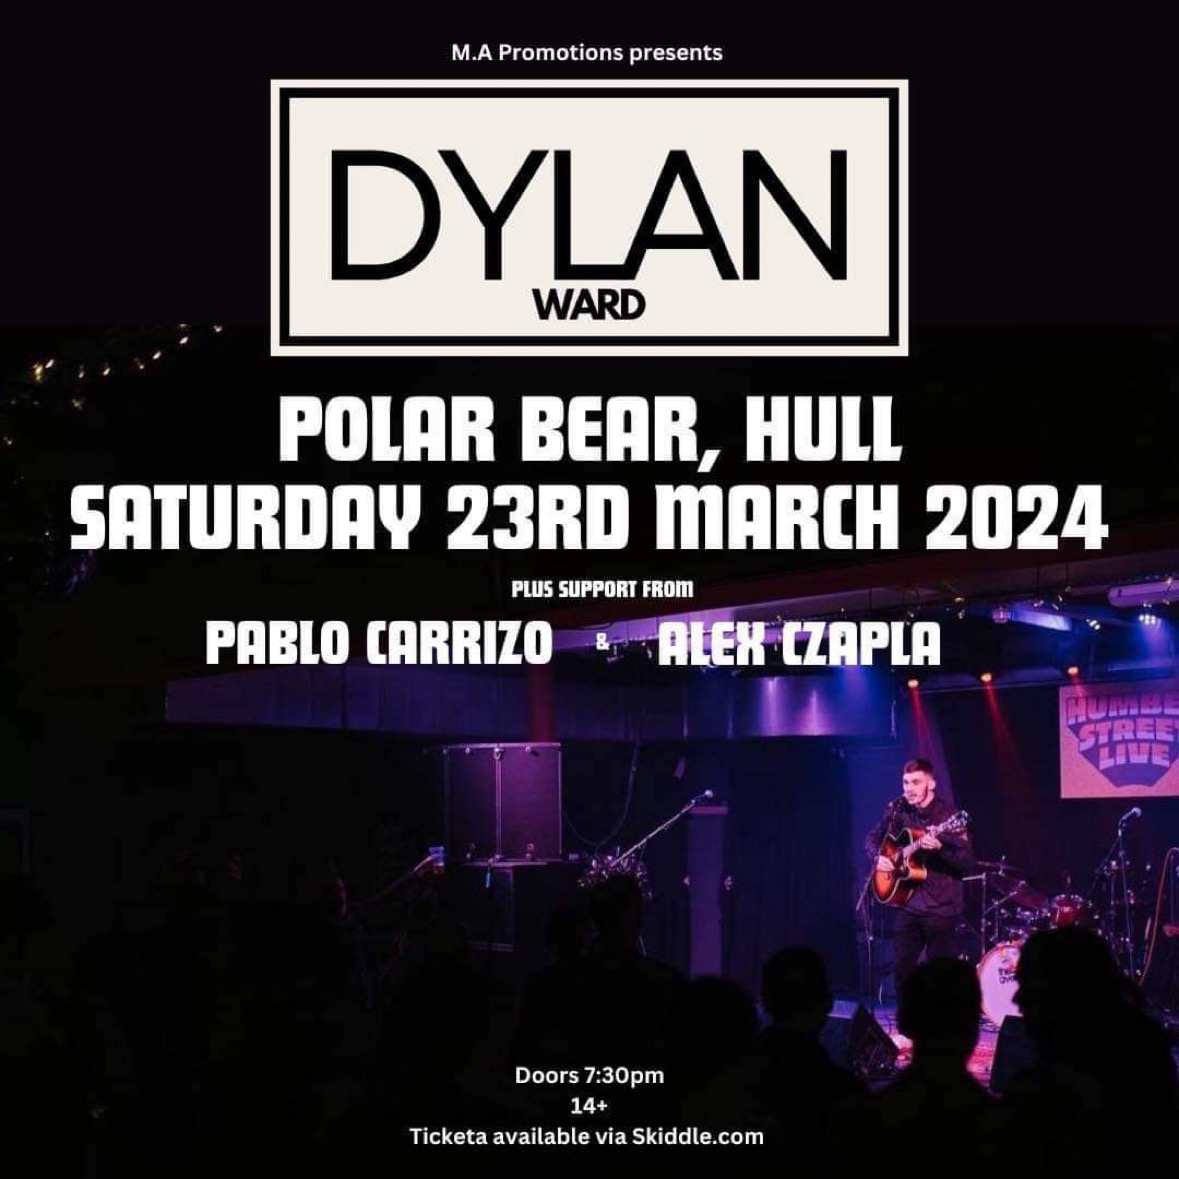 NEXT MONTH! @DylanWardMusic_ at @PolarBearRoars on Saturday 23rd March 2024! 7:30PM - 10:30PM // 14+ £7 TICKETS >> bit.ly/3vpcVE3 With support from Pablo Carrizo and Alex Czapla #PolarBearHull